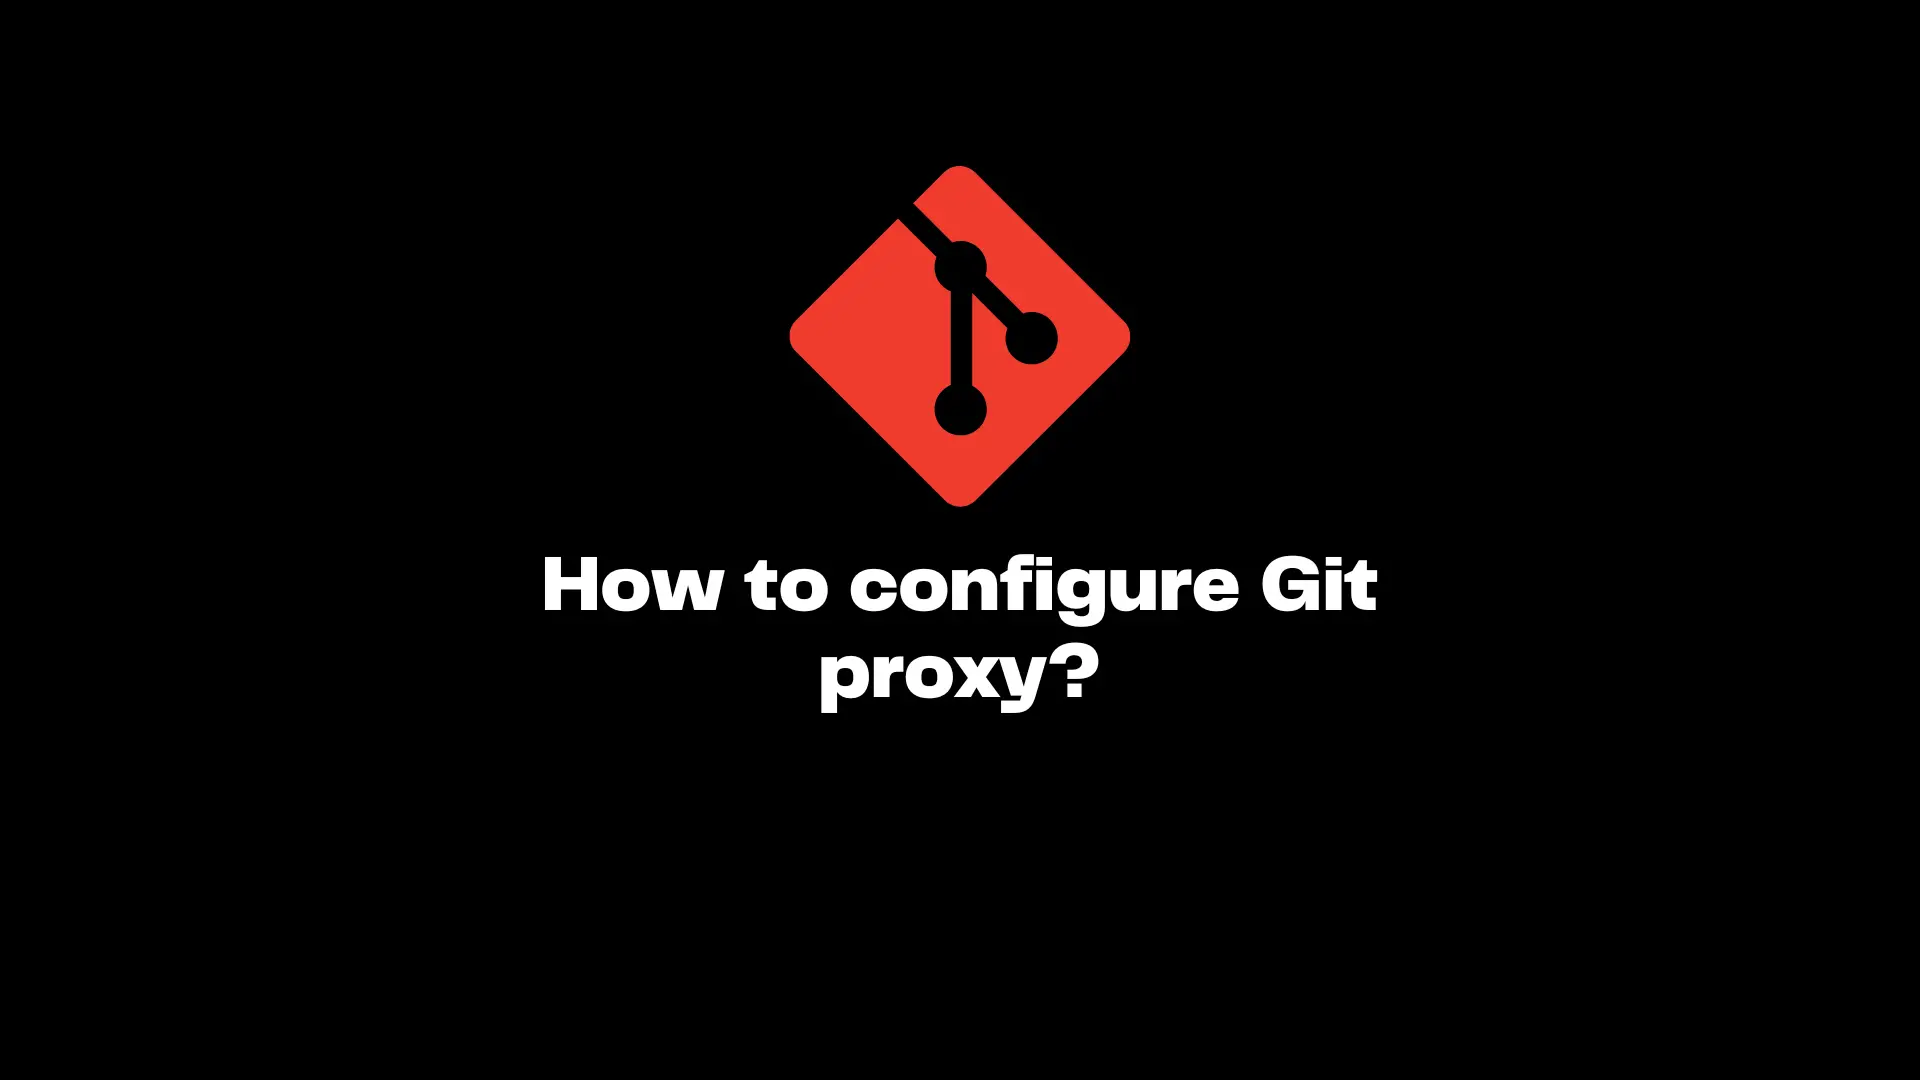 Does not match any git